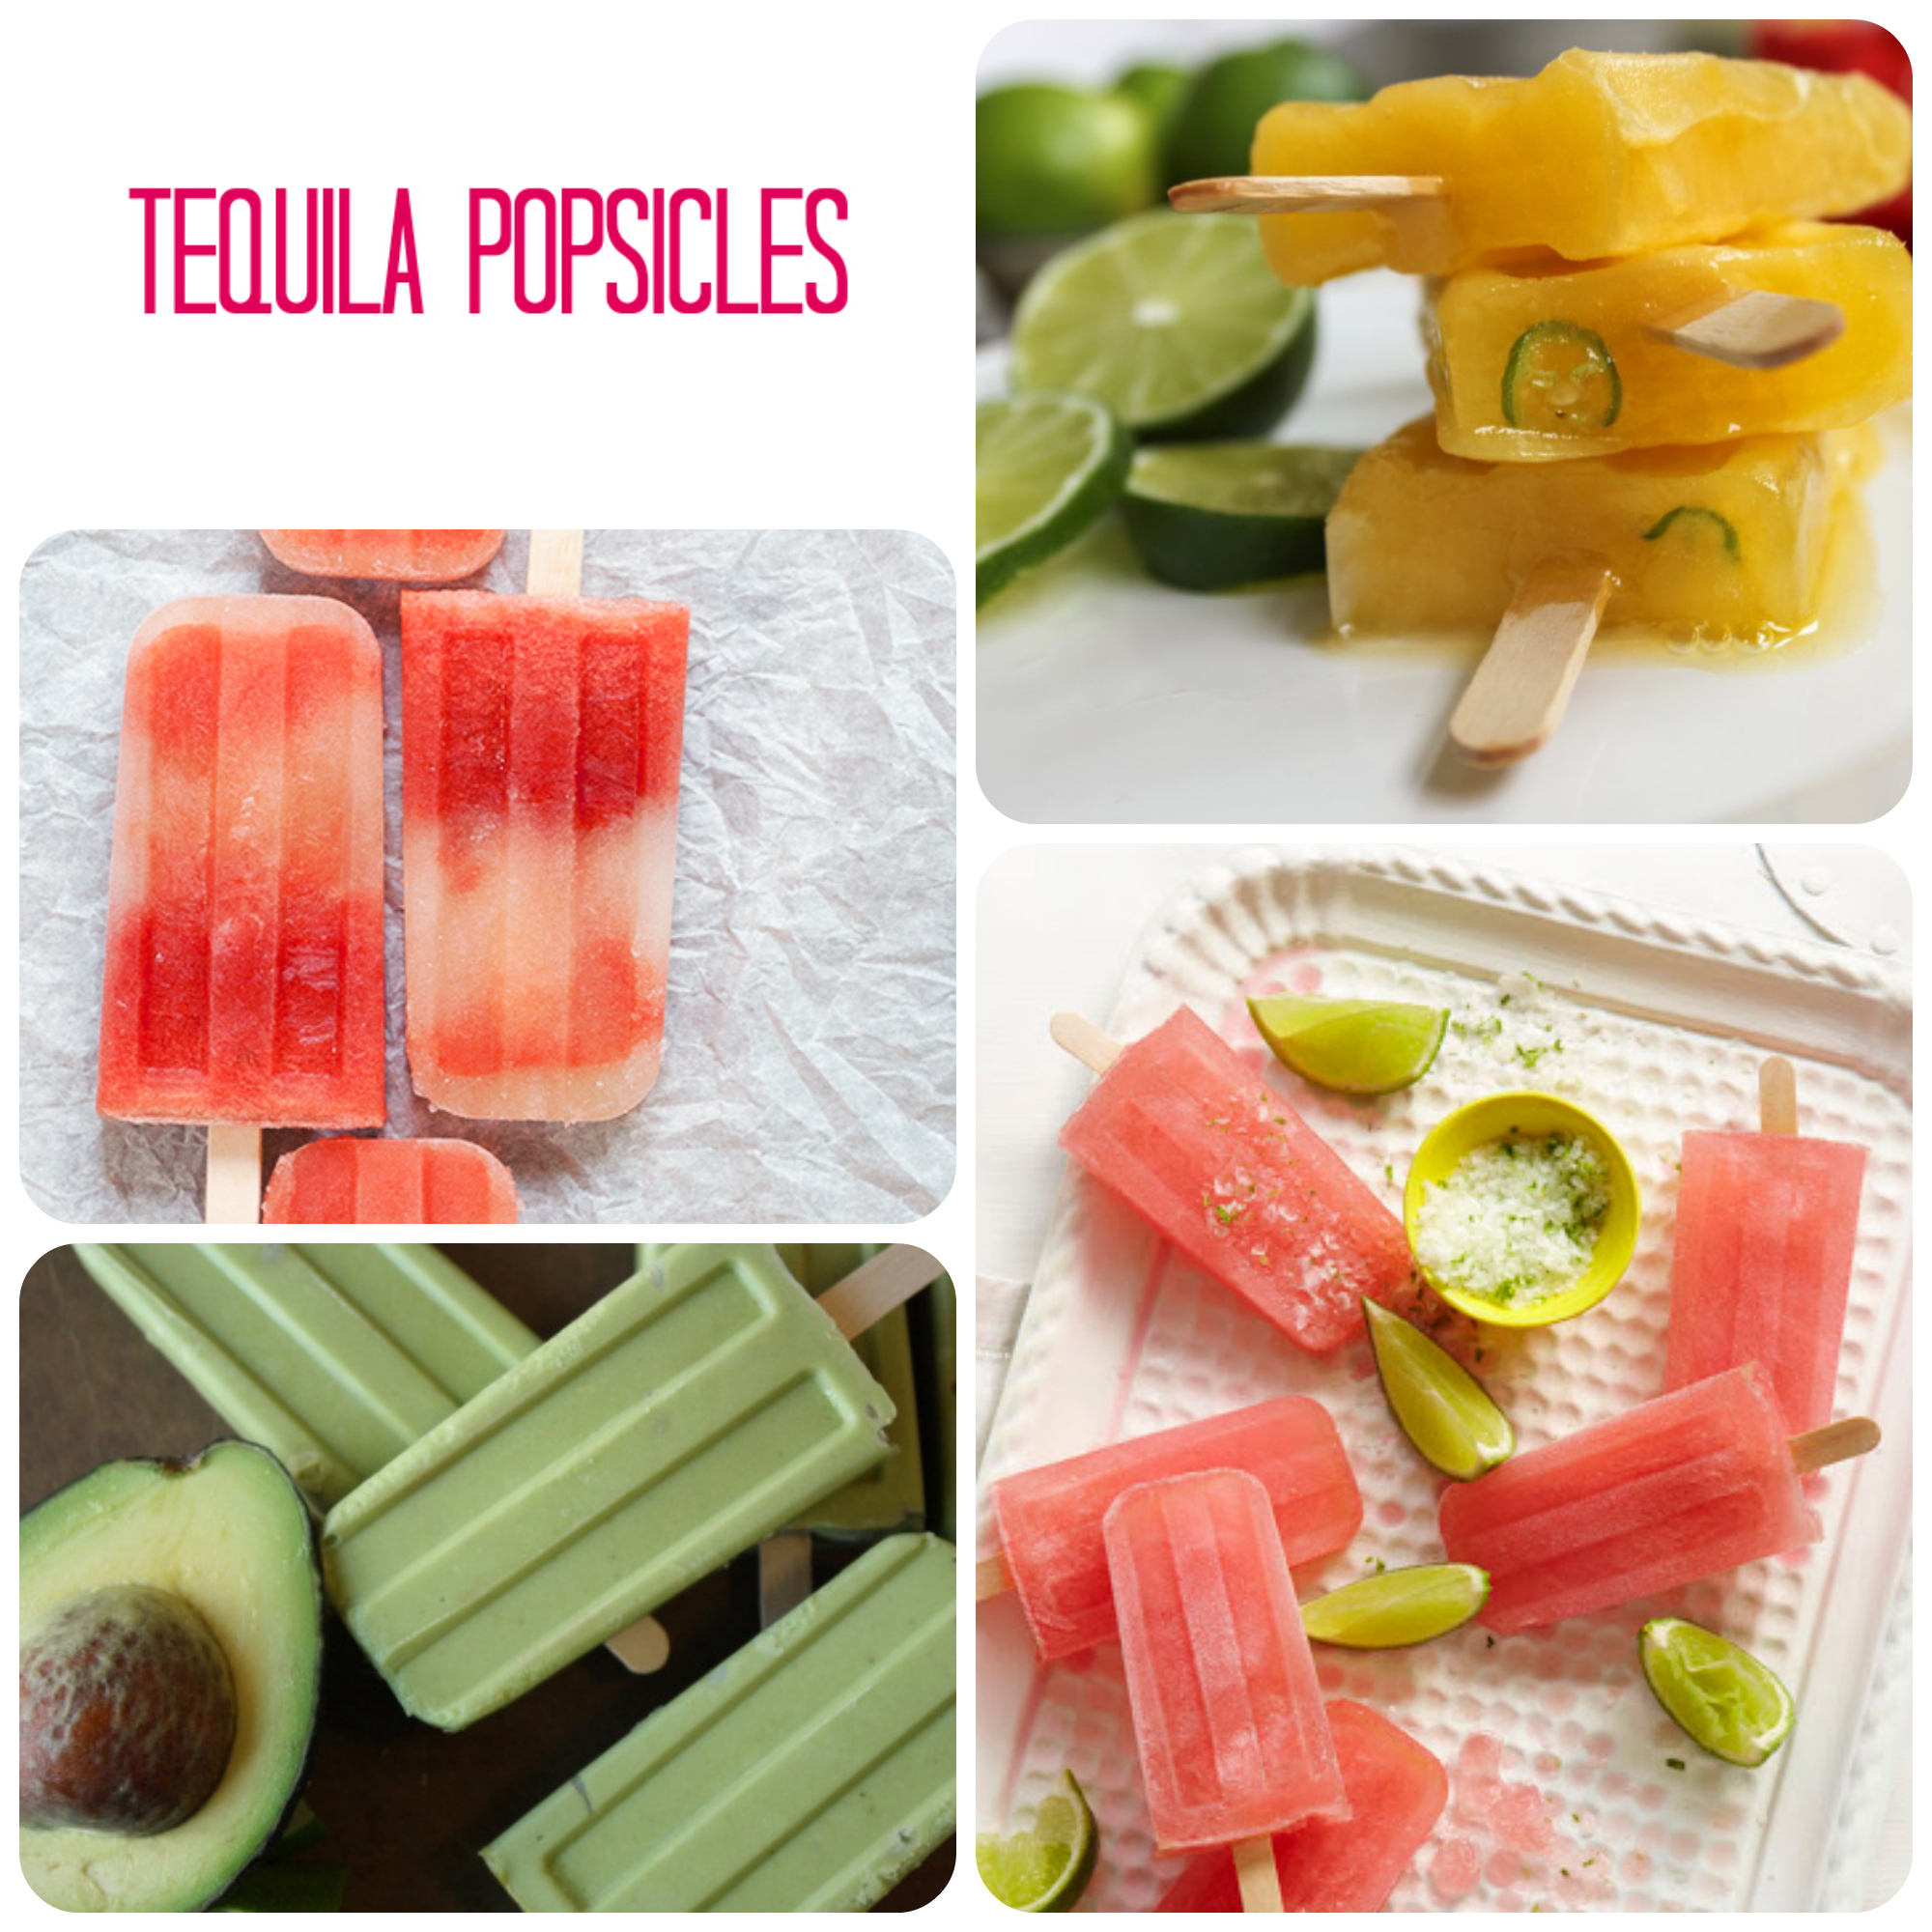 Tequila popsicles